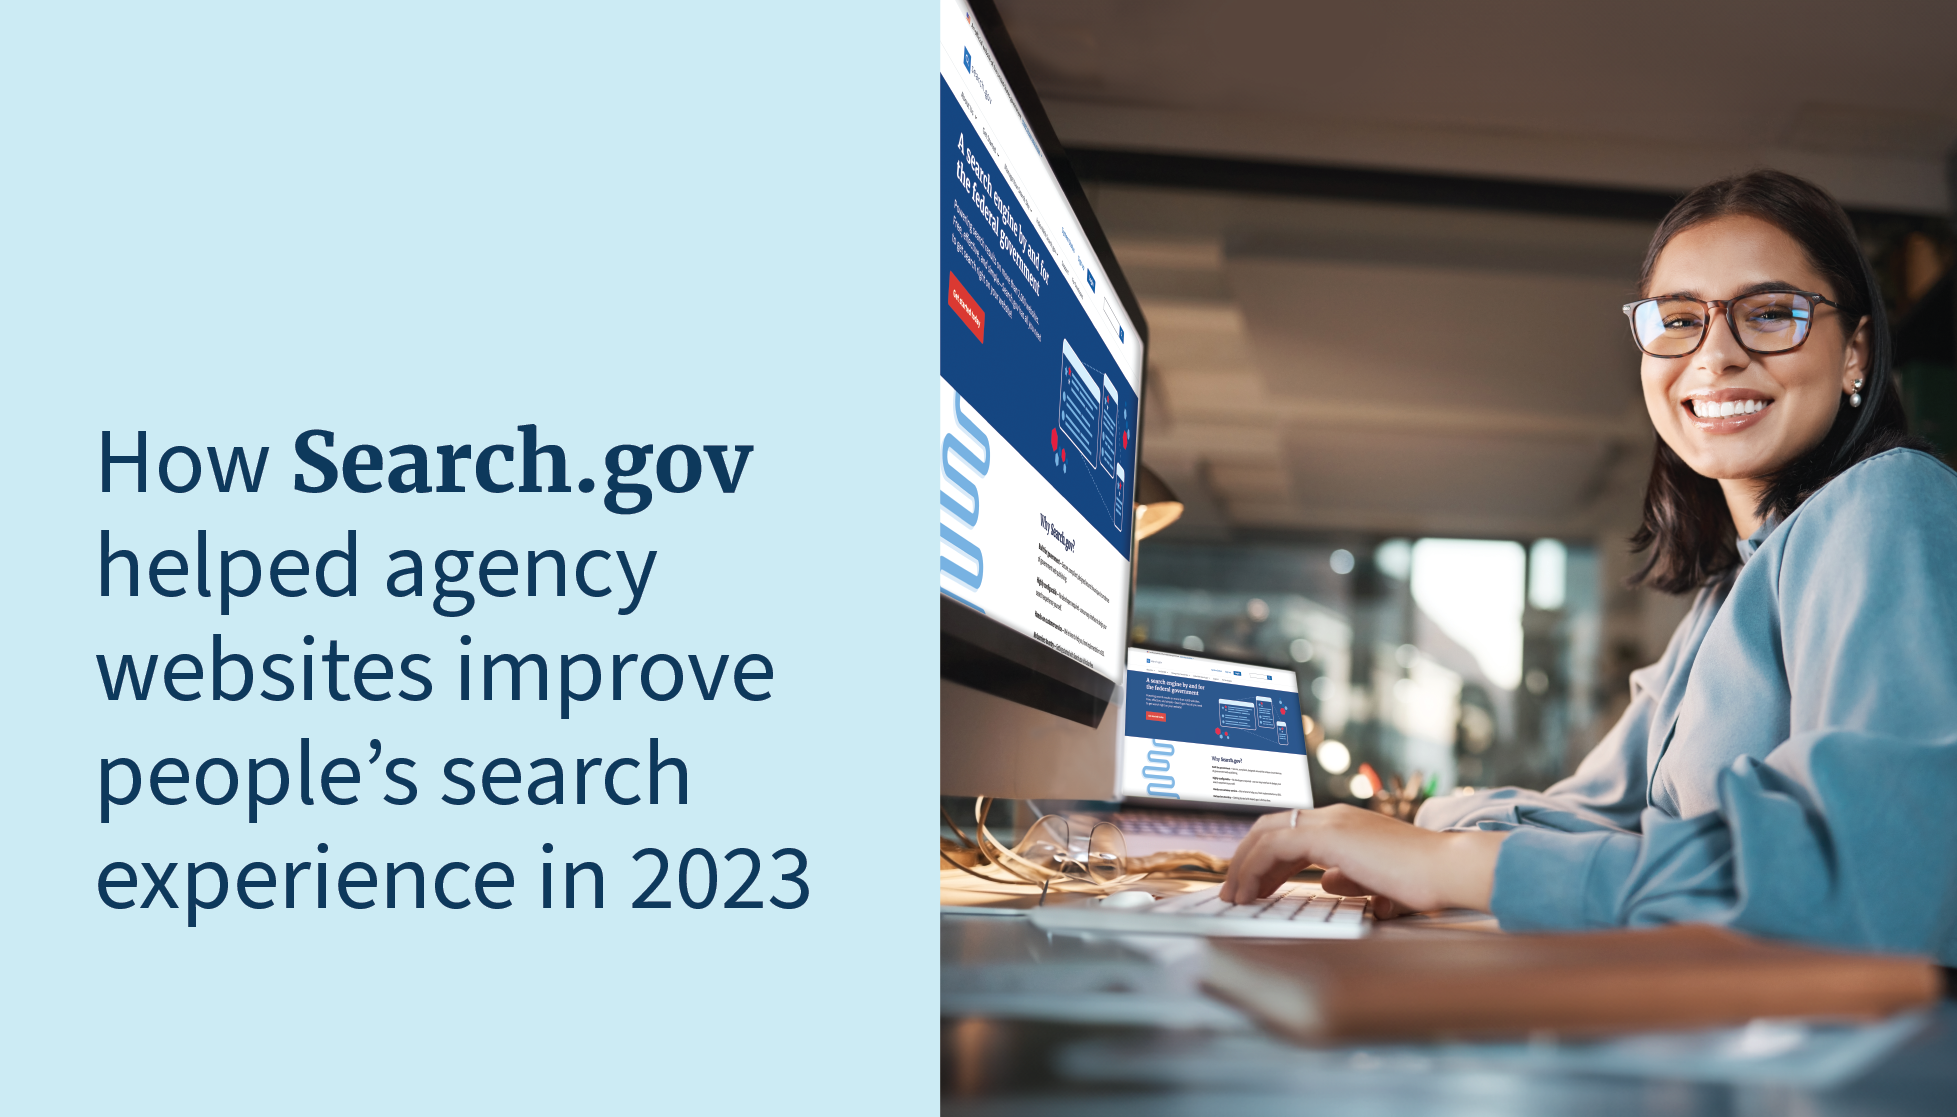 How Search.gov helped agency websites improve people’s search experience in 2023